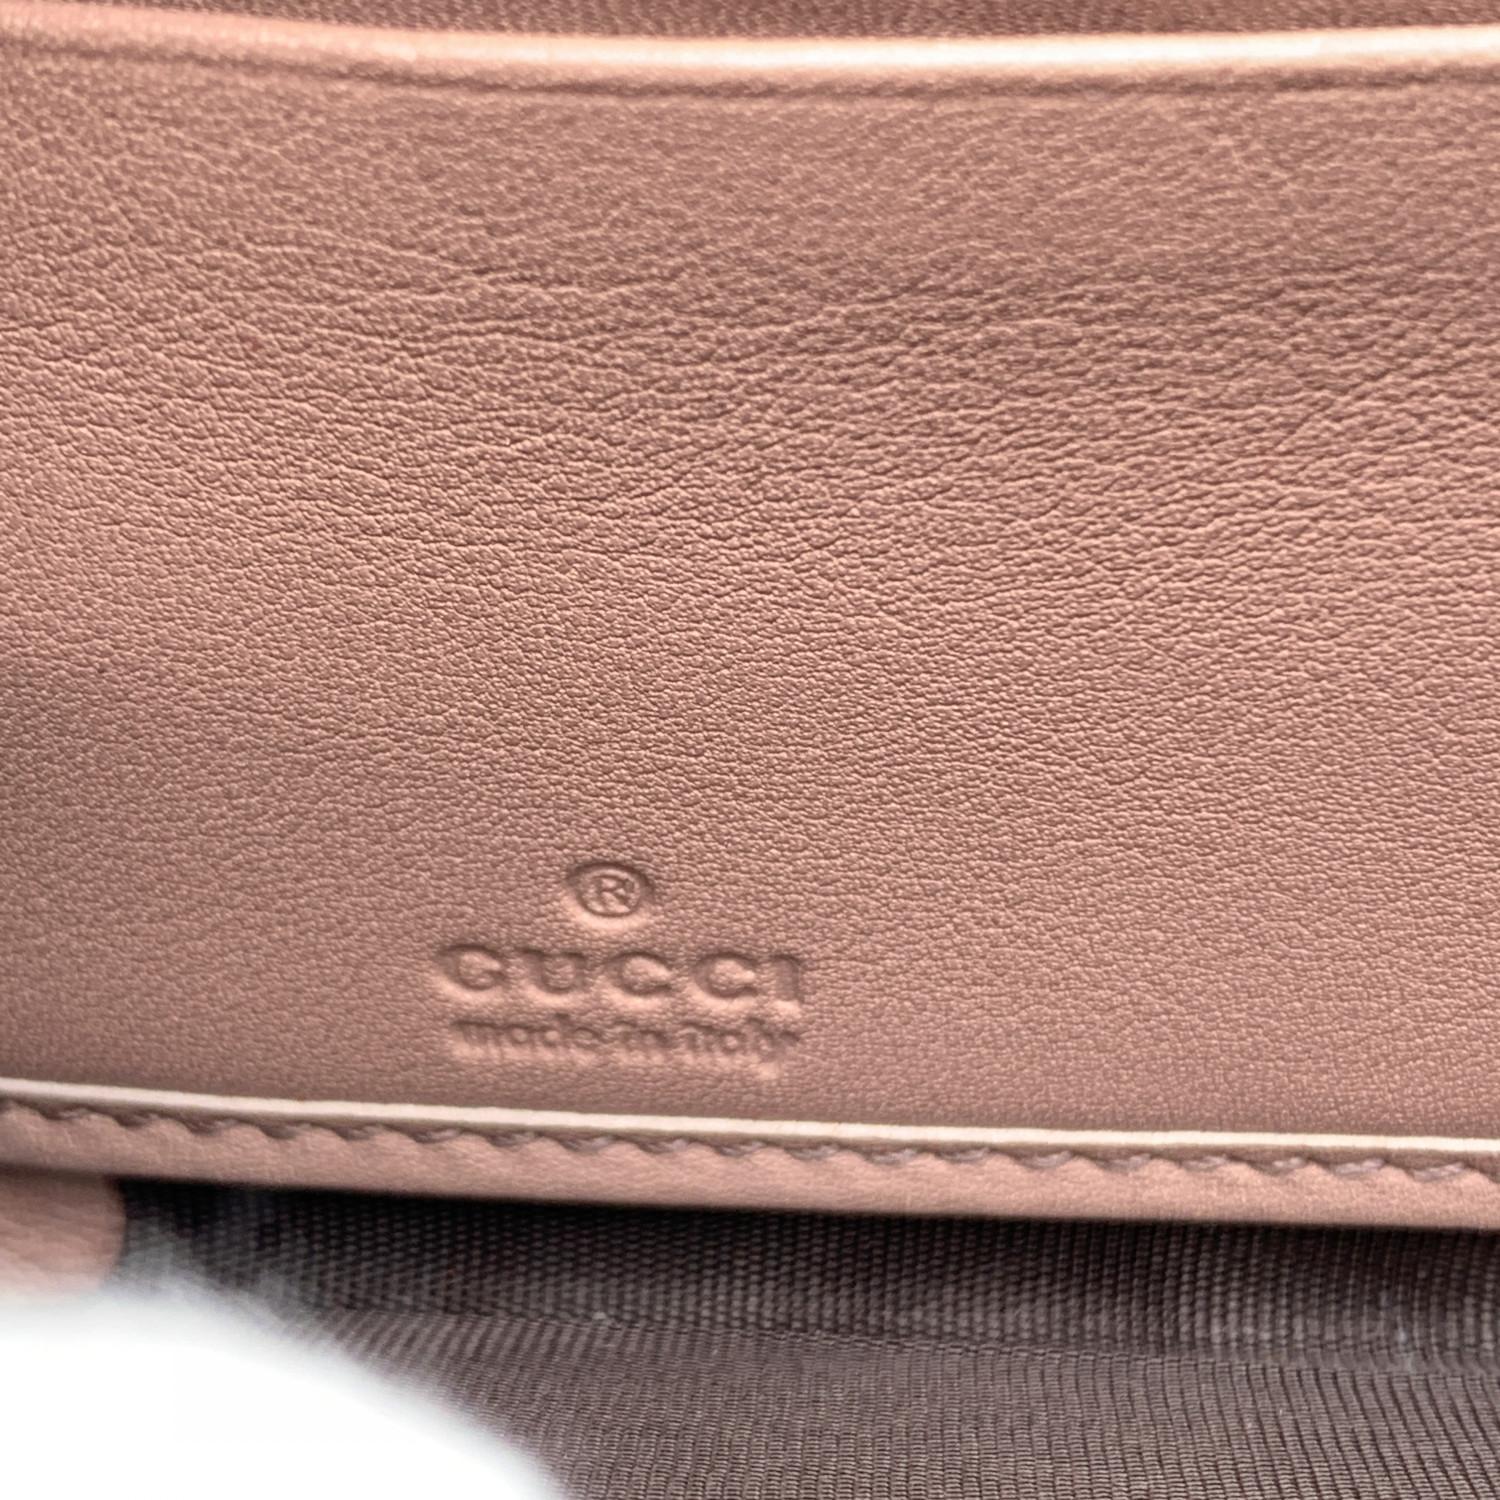 Gucci Pink Leather Continental Zip Wallet Microguccissima Trim 3